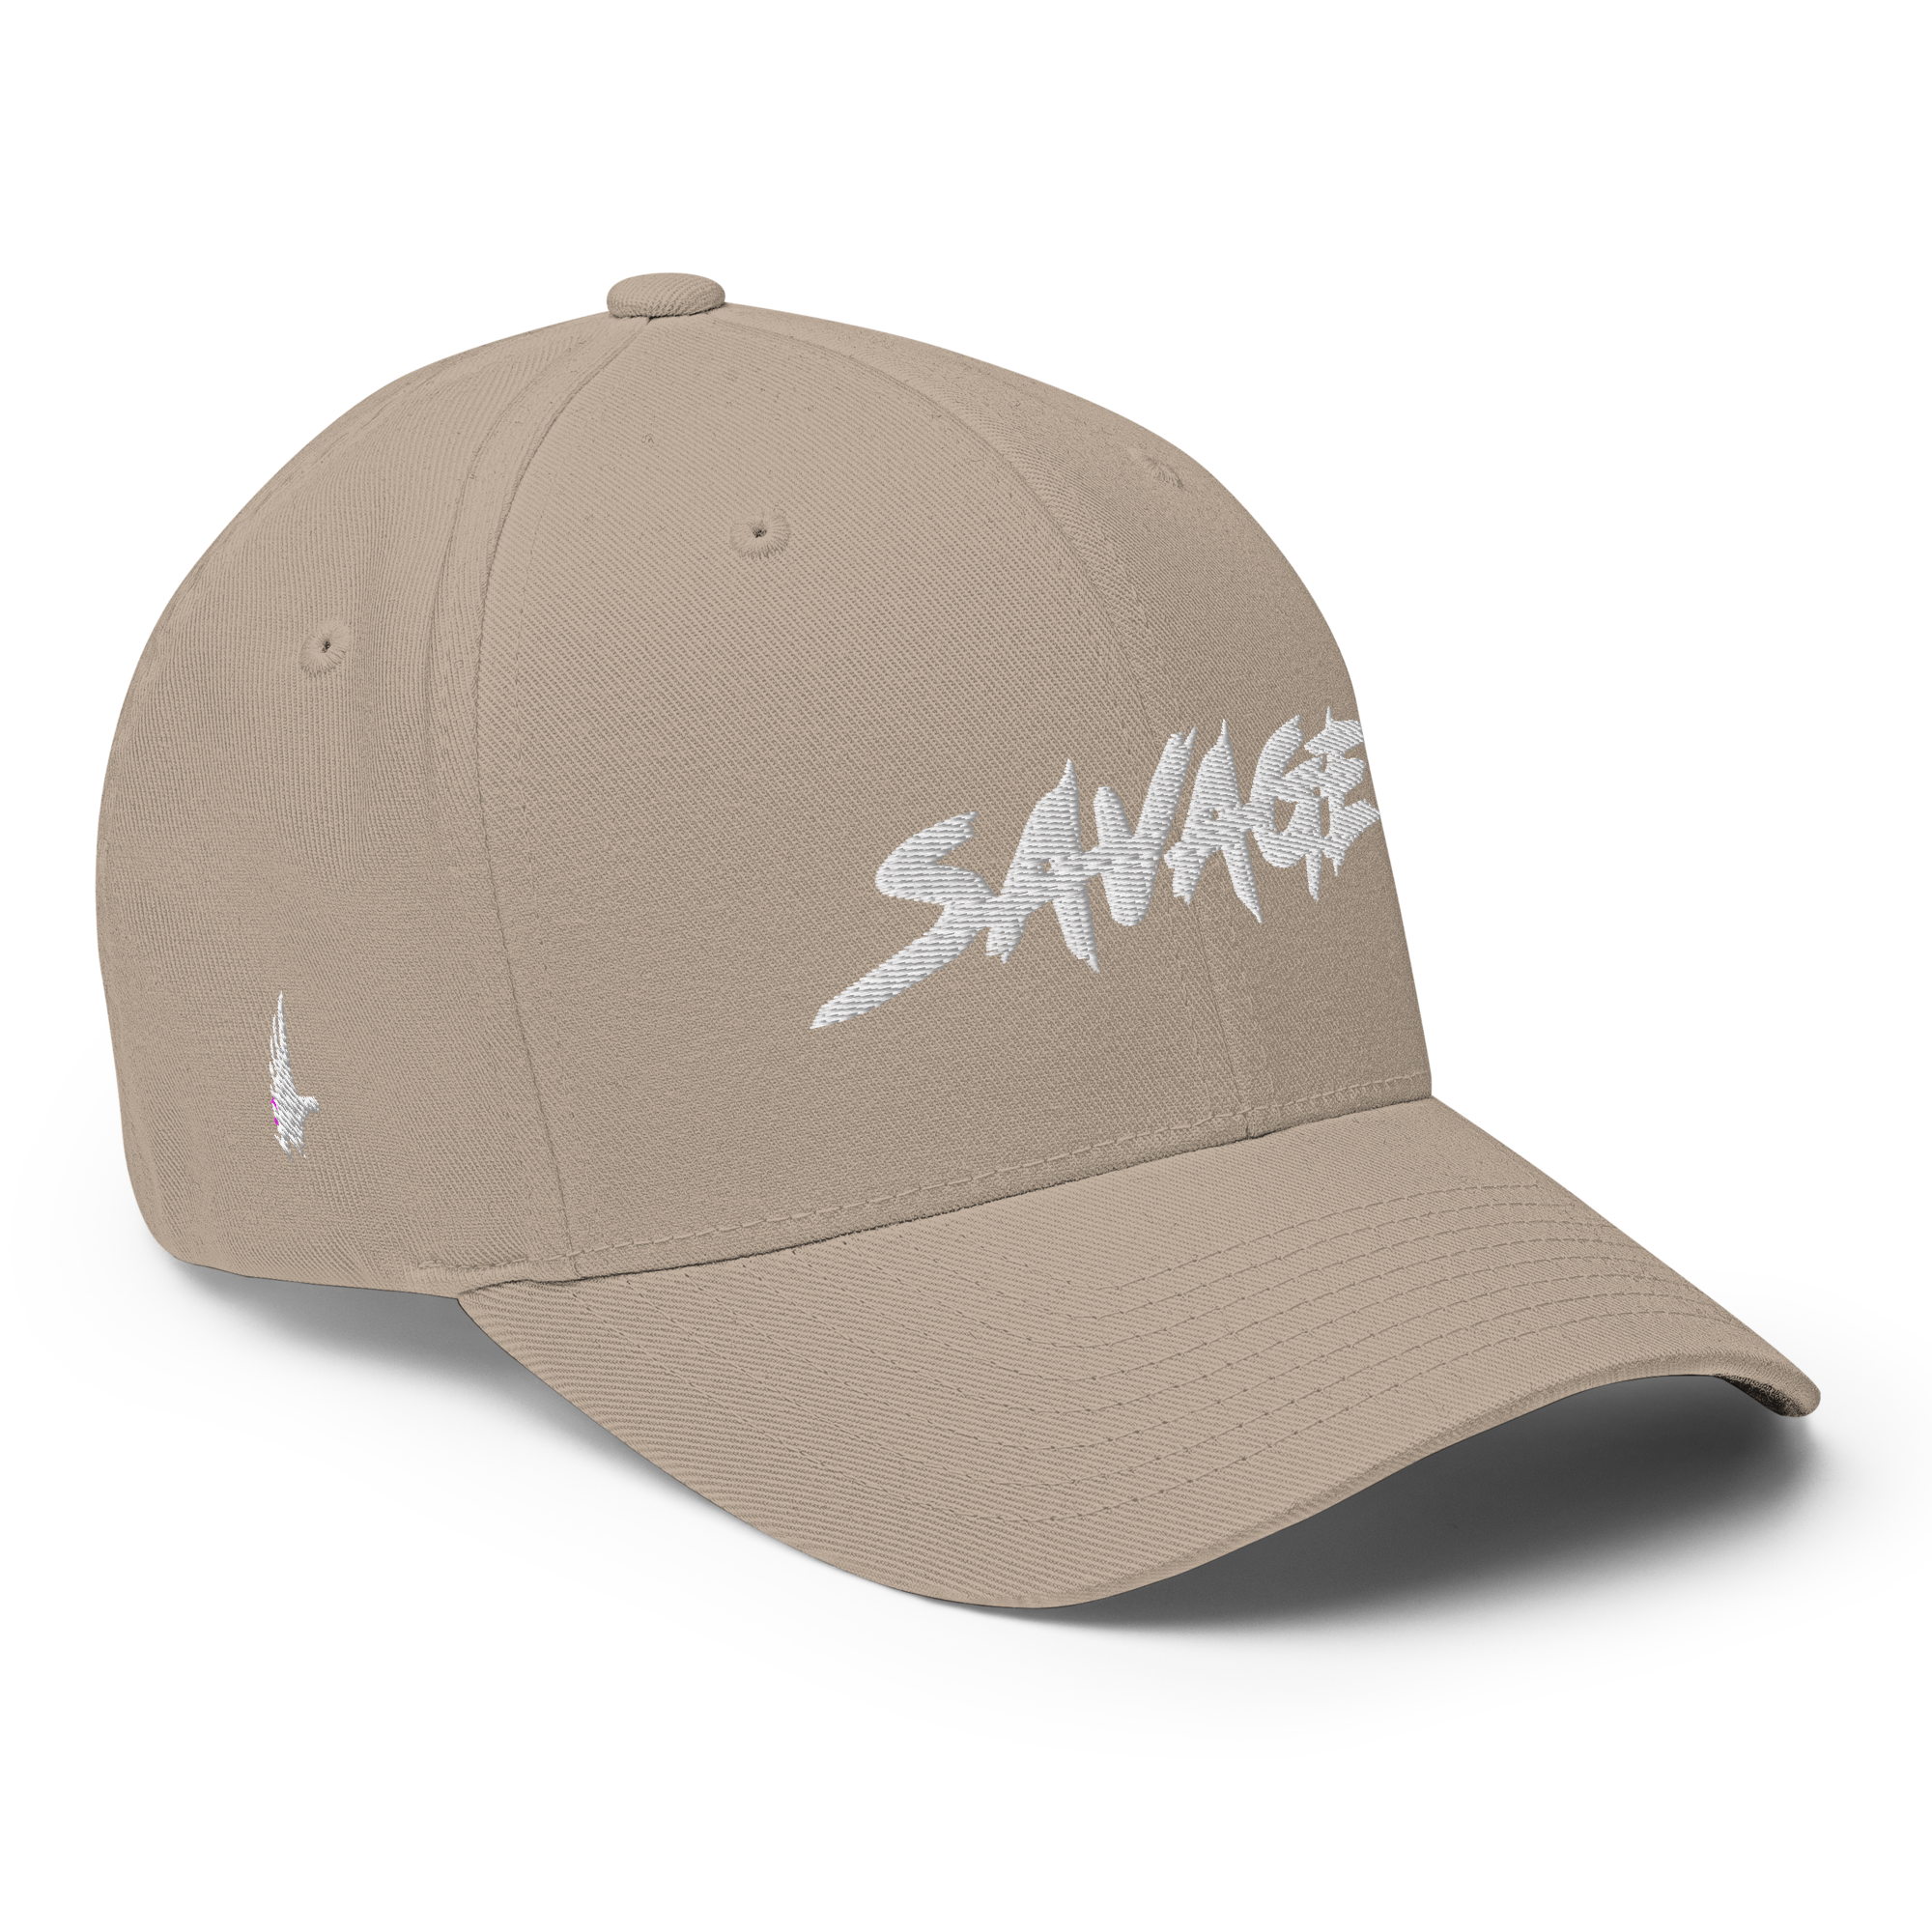 Savage Fitted Hat Sandstone - Loyalty Vibes